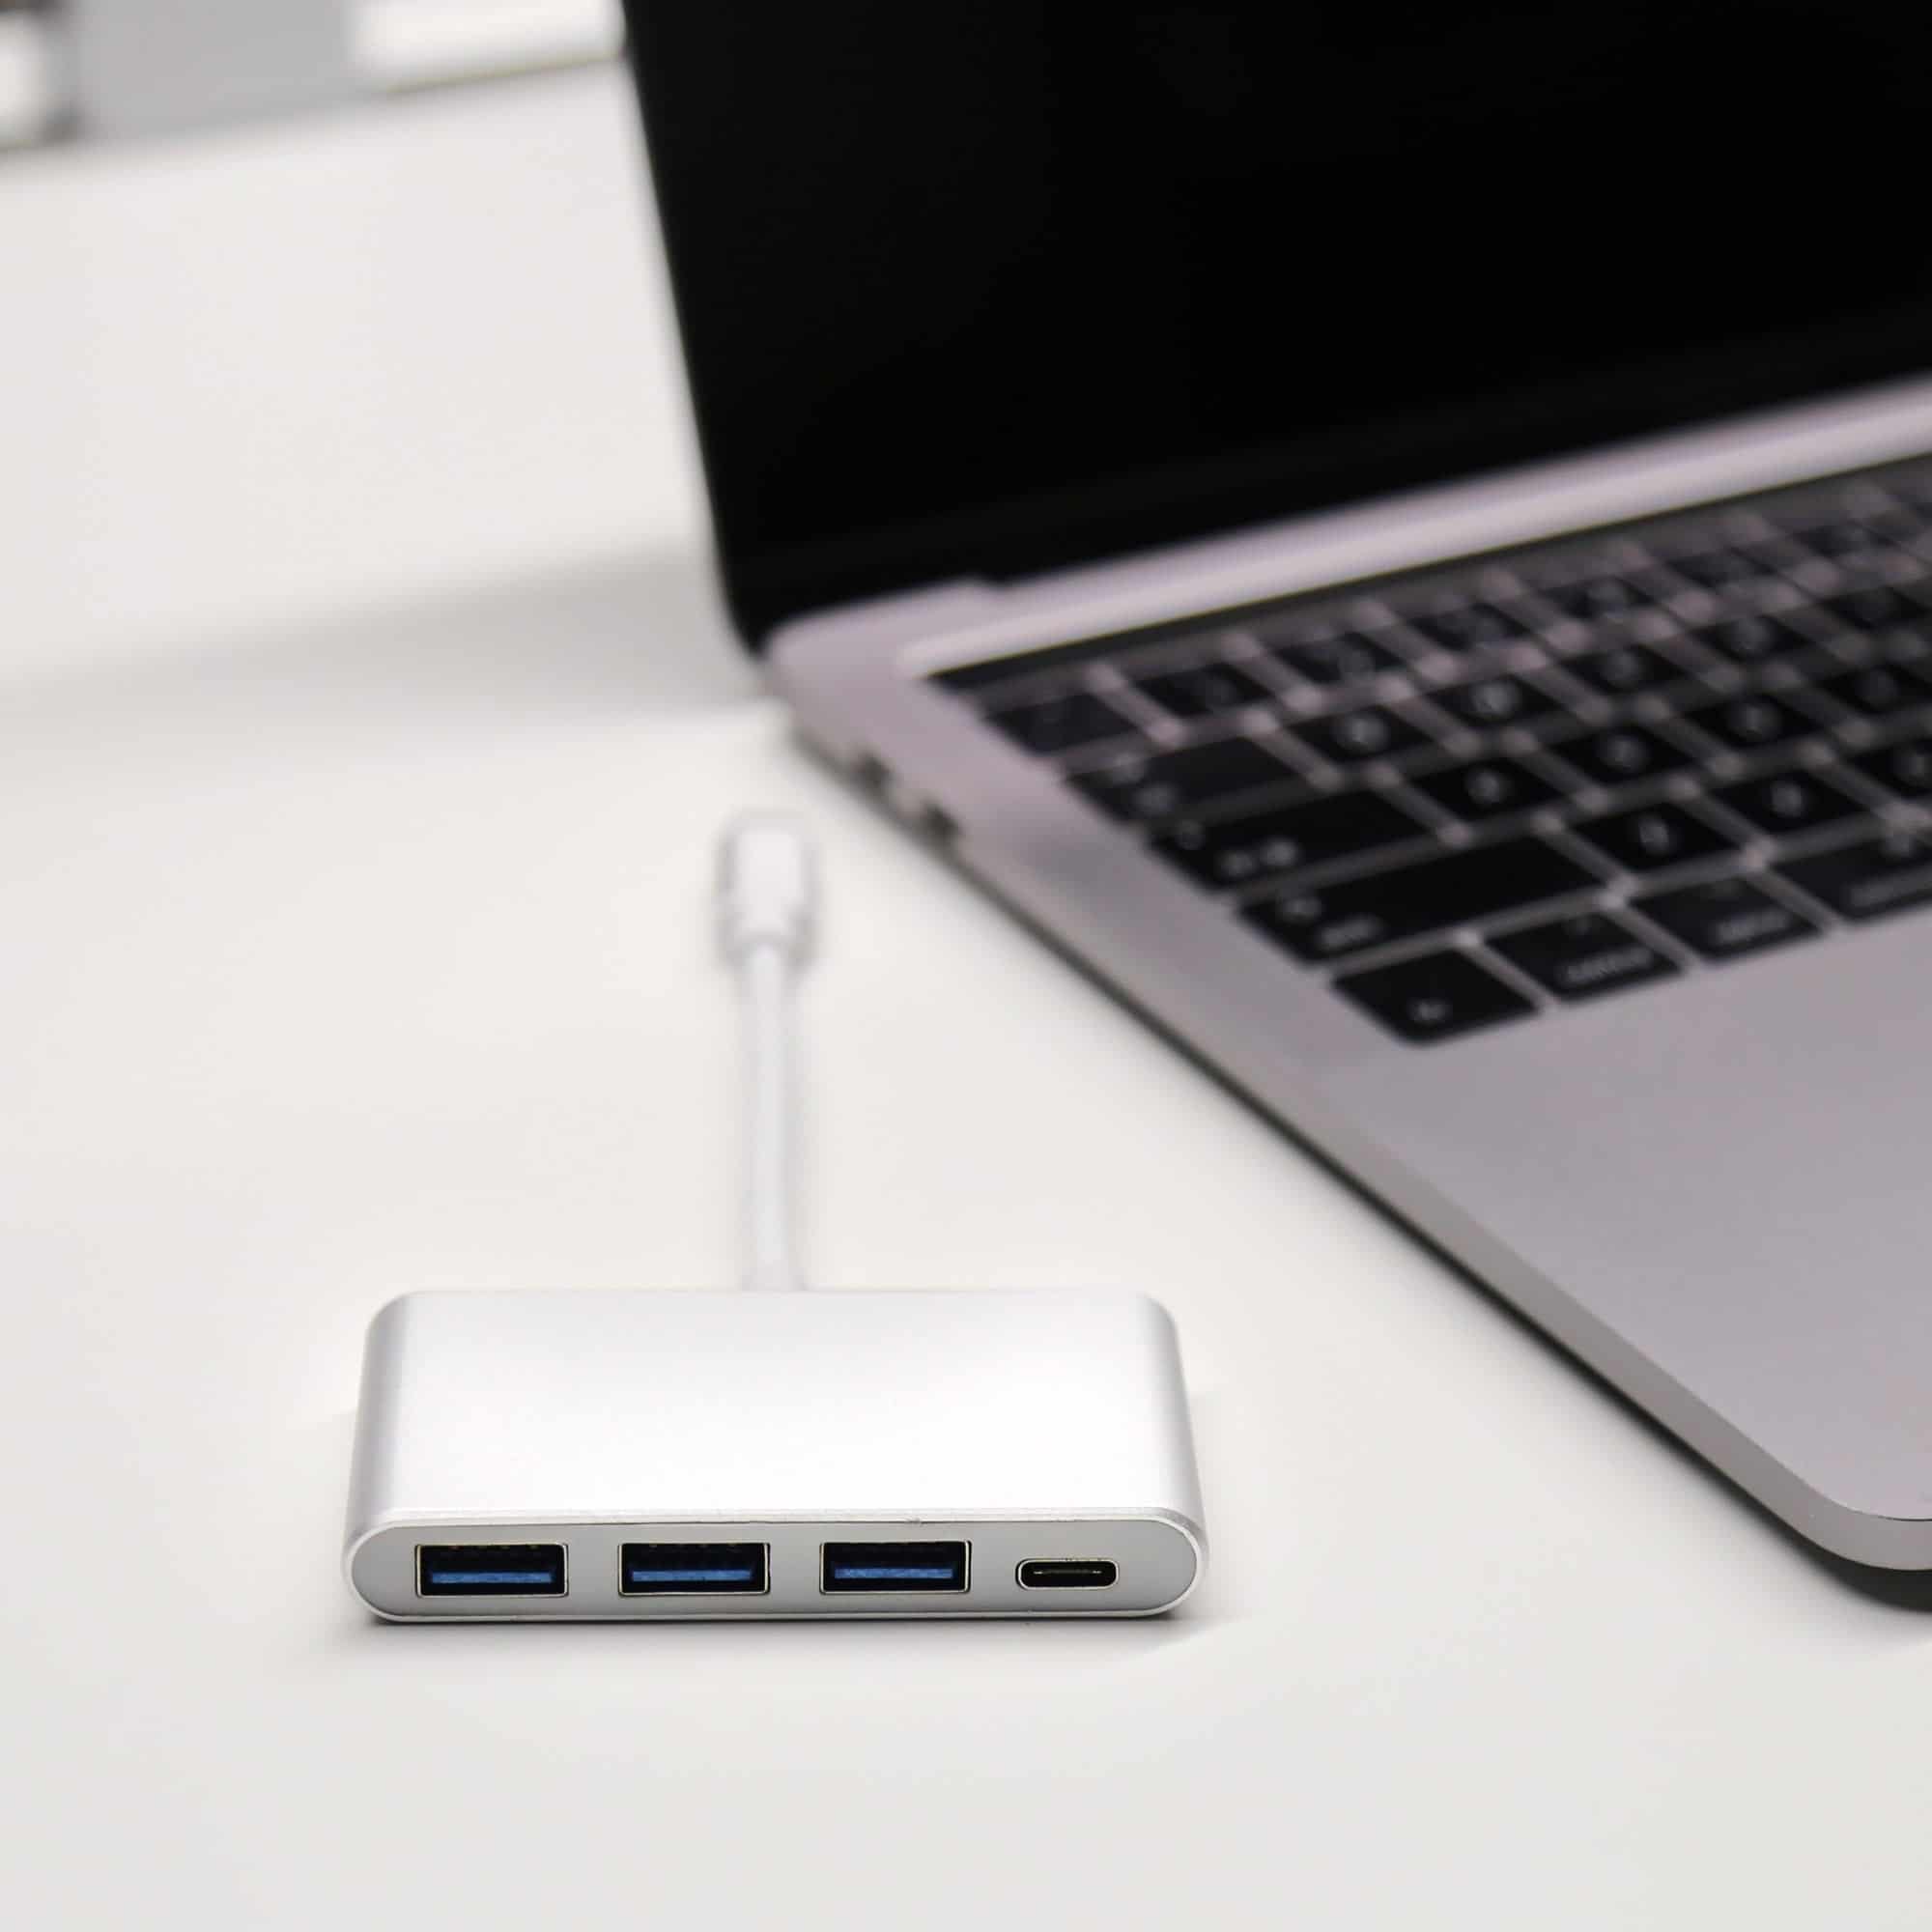 MacBooks Air and Pro owners suffer from connectivity problem with USB accessories